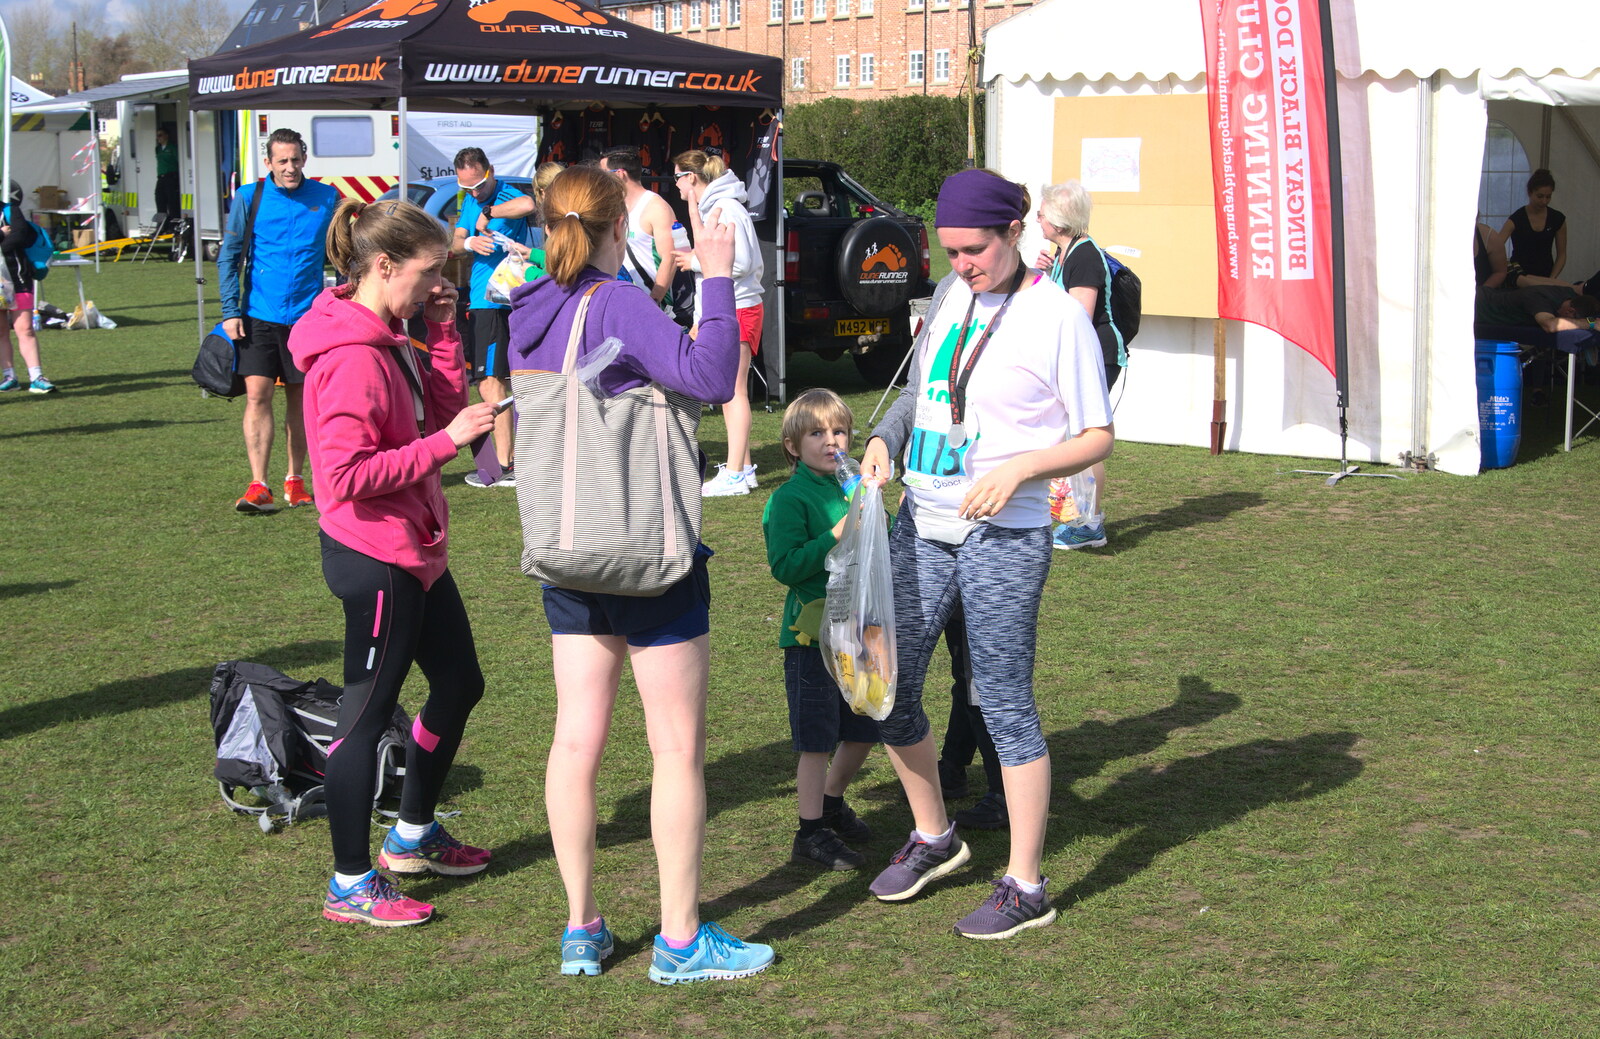 Harry and the runners hang around from The Black Dog Festival of Running, Bungay, Suffolk - 2nd April 2017